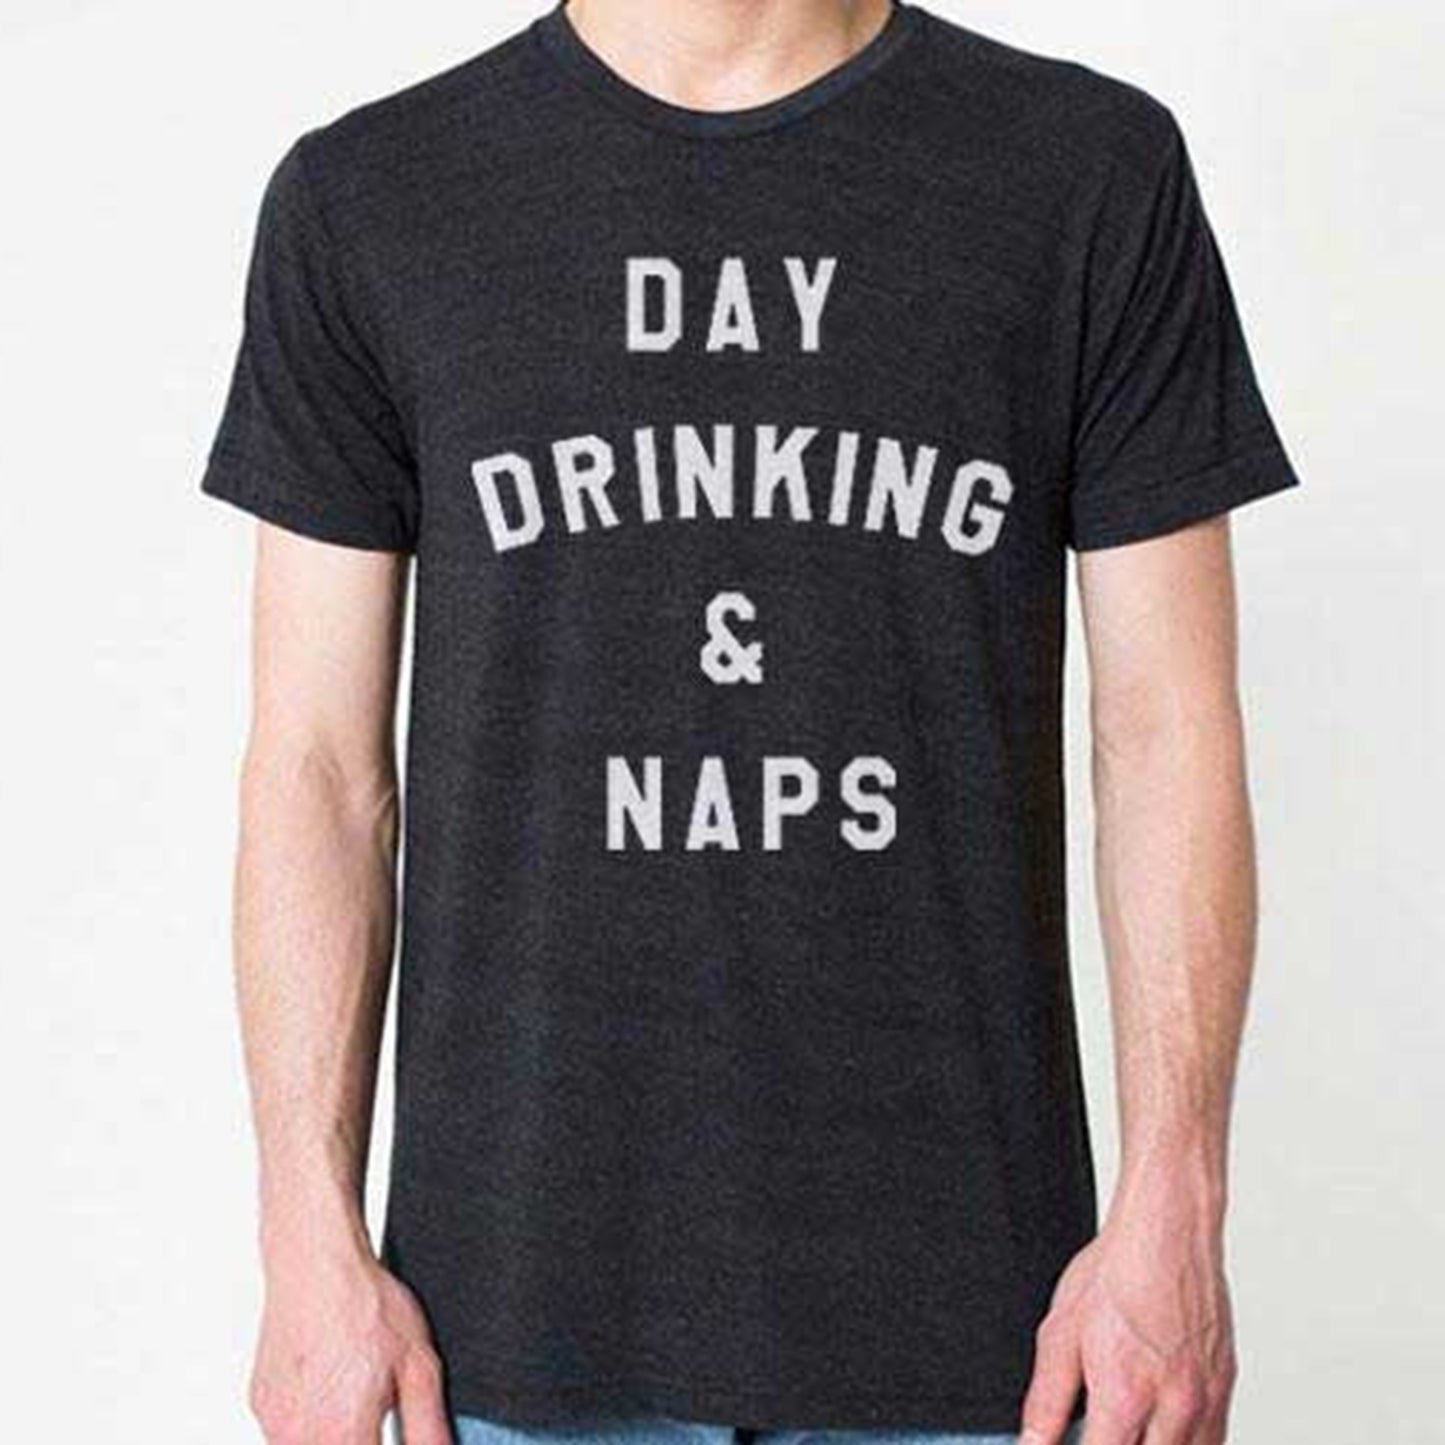 Day Drinking T-Shirt